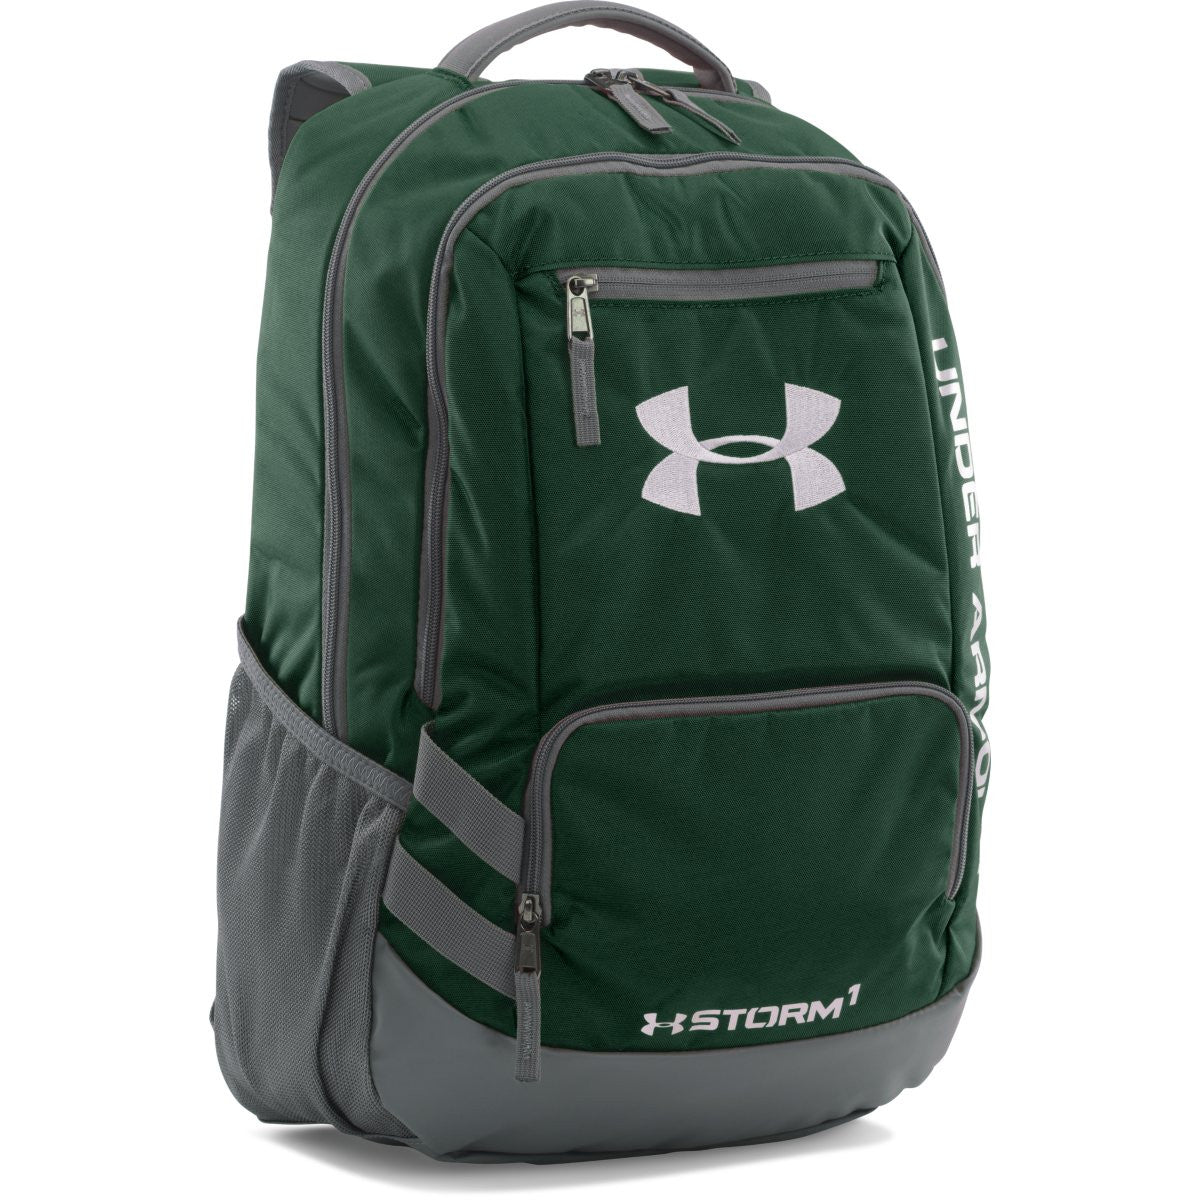 Under Armour Storm 1 Unisex Adults Black Green Mint Backpack School Everyday